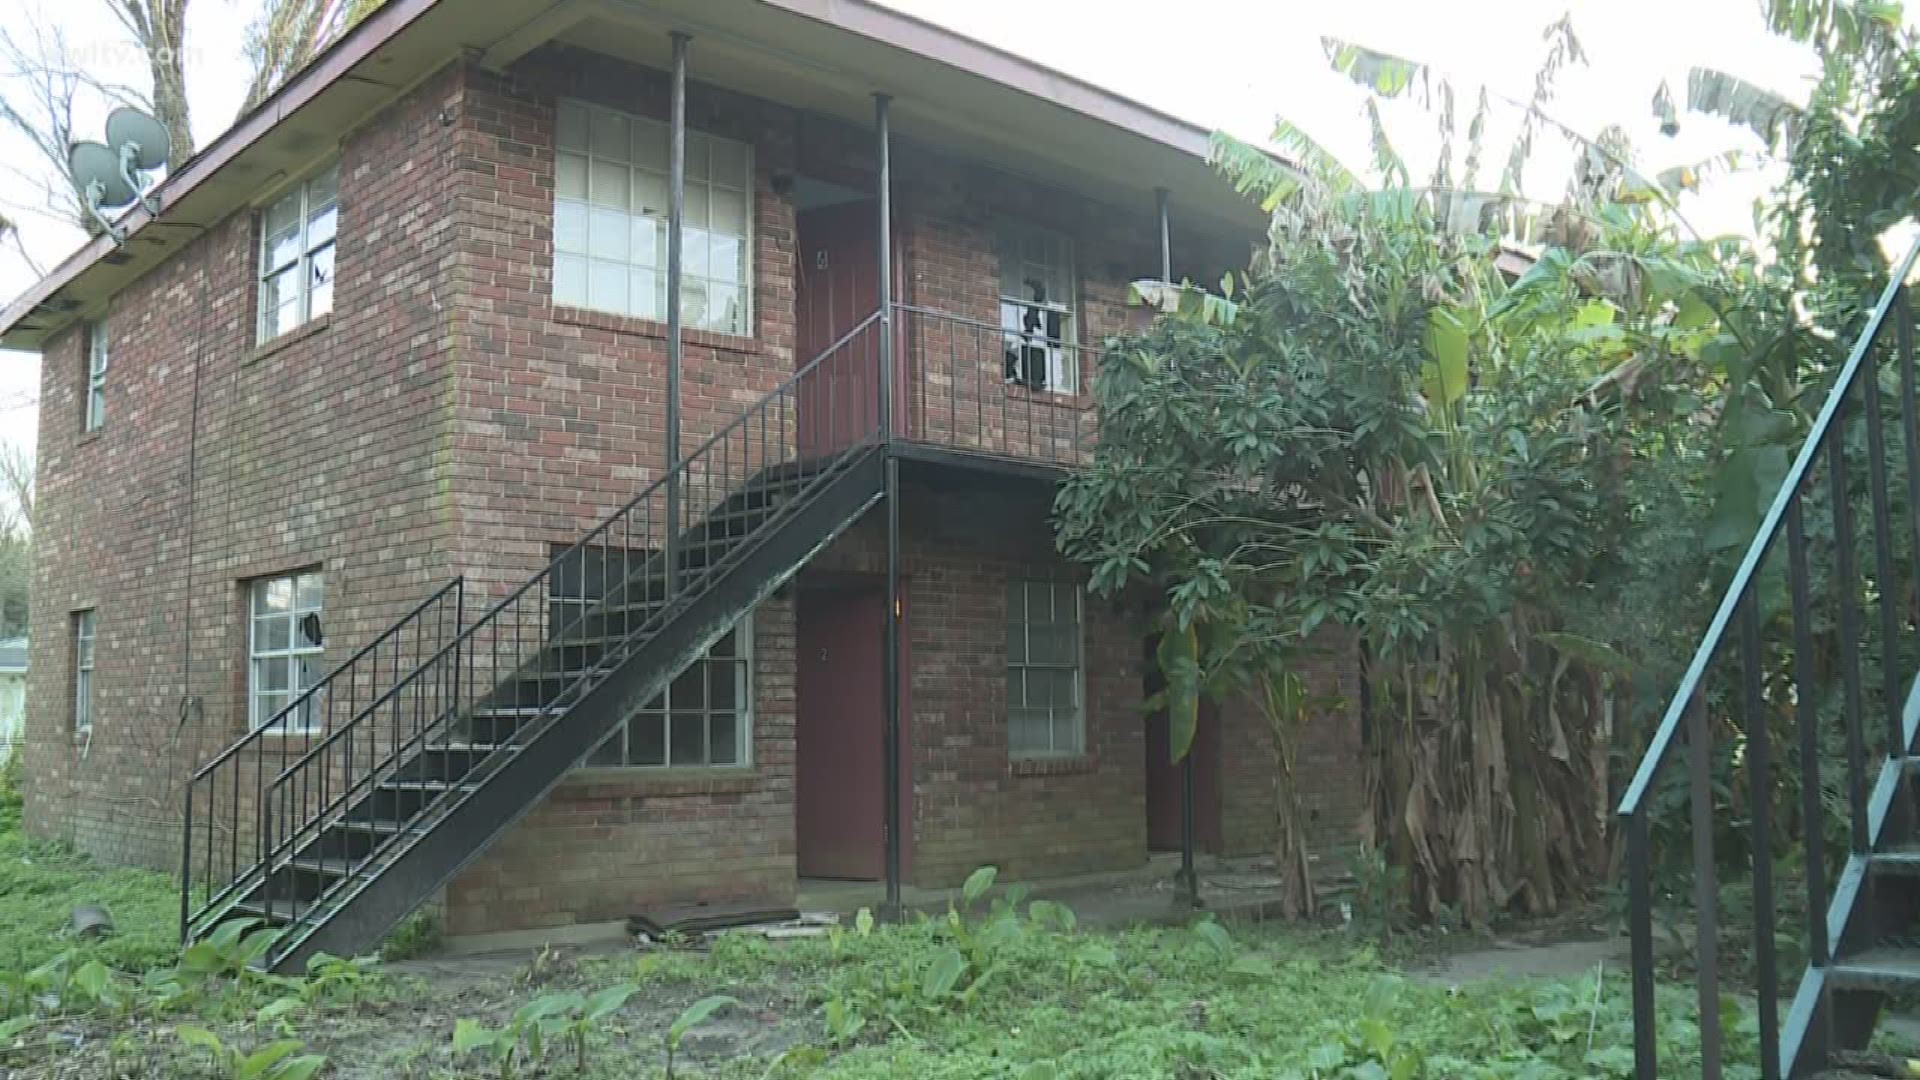 A Hahnville apartment complex, which was supposed to be a new home for veterans in St. Charles Parish, was severely damaged by thieves and vandals over an eight month period in which the property was left unattended, according to the property owner.